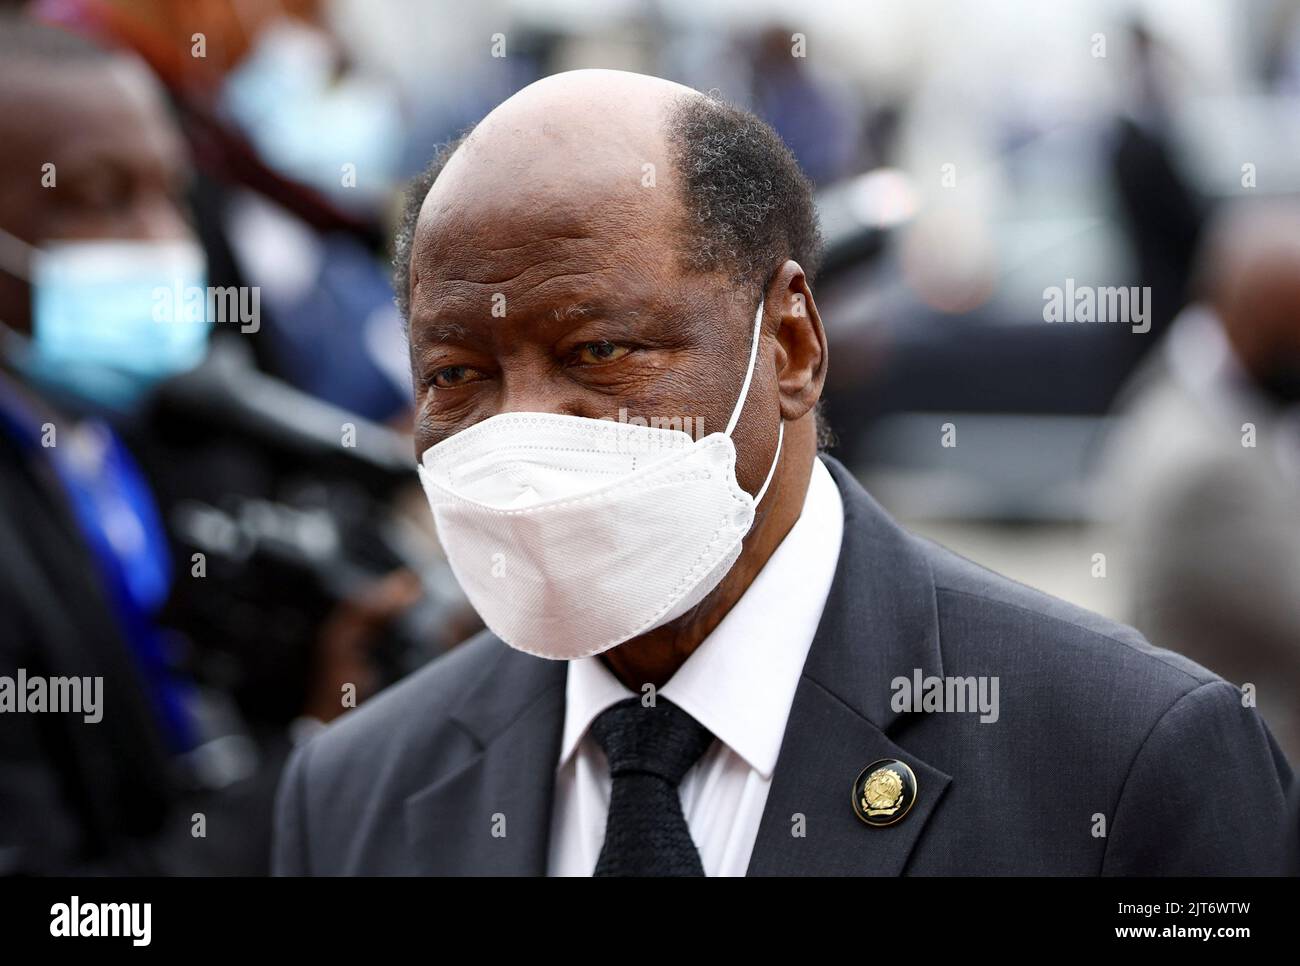 Joaquim Chissano, former president of Mozambique, arrives for the funeral of Angola's former President Jose Eduardo dos Santos who died in Spain in July, at the Agostinho Neto Memorial, in Luanda, Angola, August 28, 2022. REUTERS/Siphiwe Sibeko Stock Photo